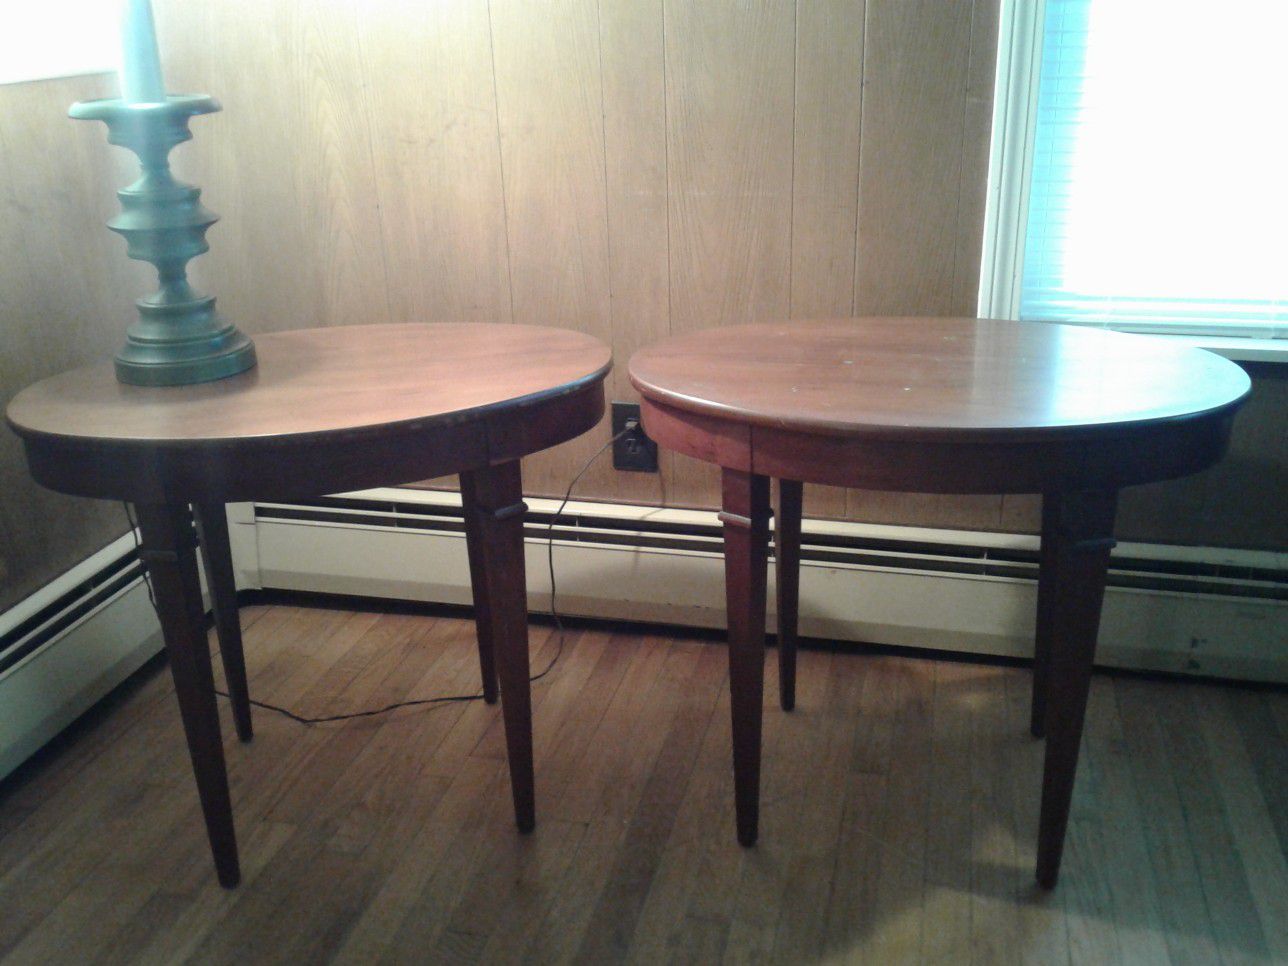 2 Cherry Wood end tables